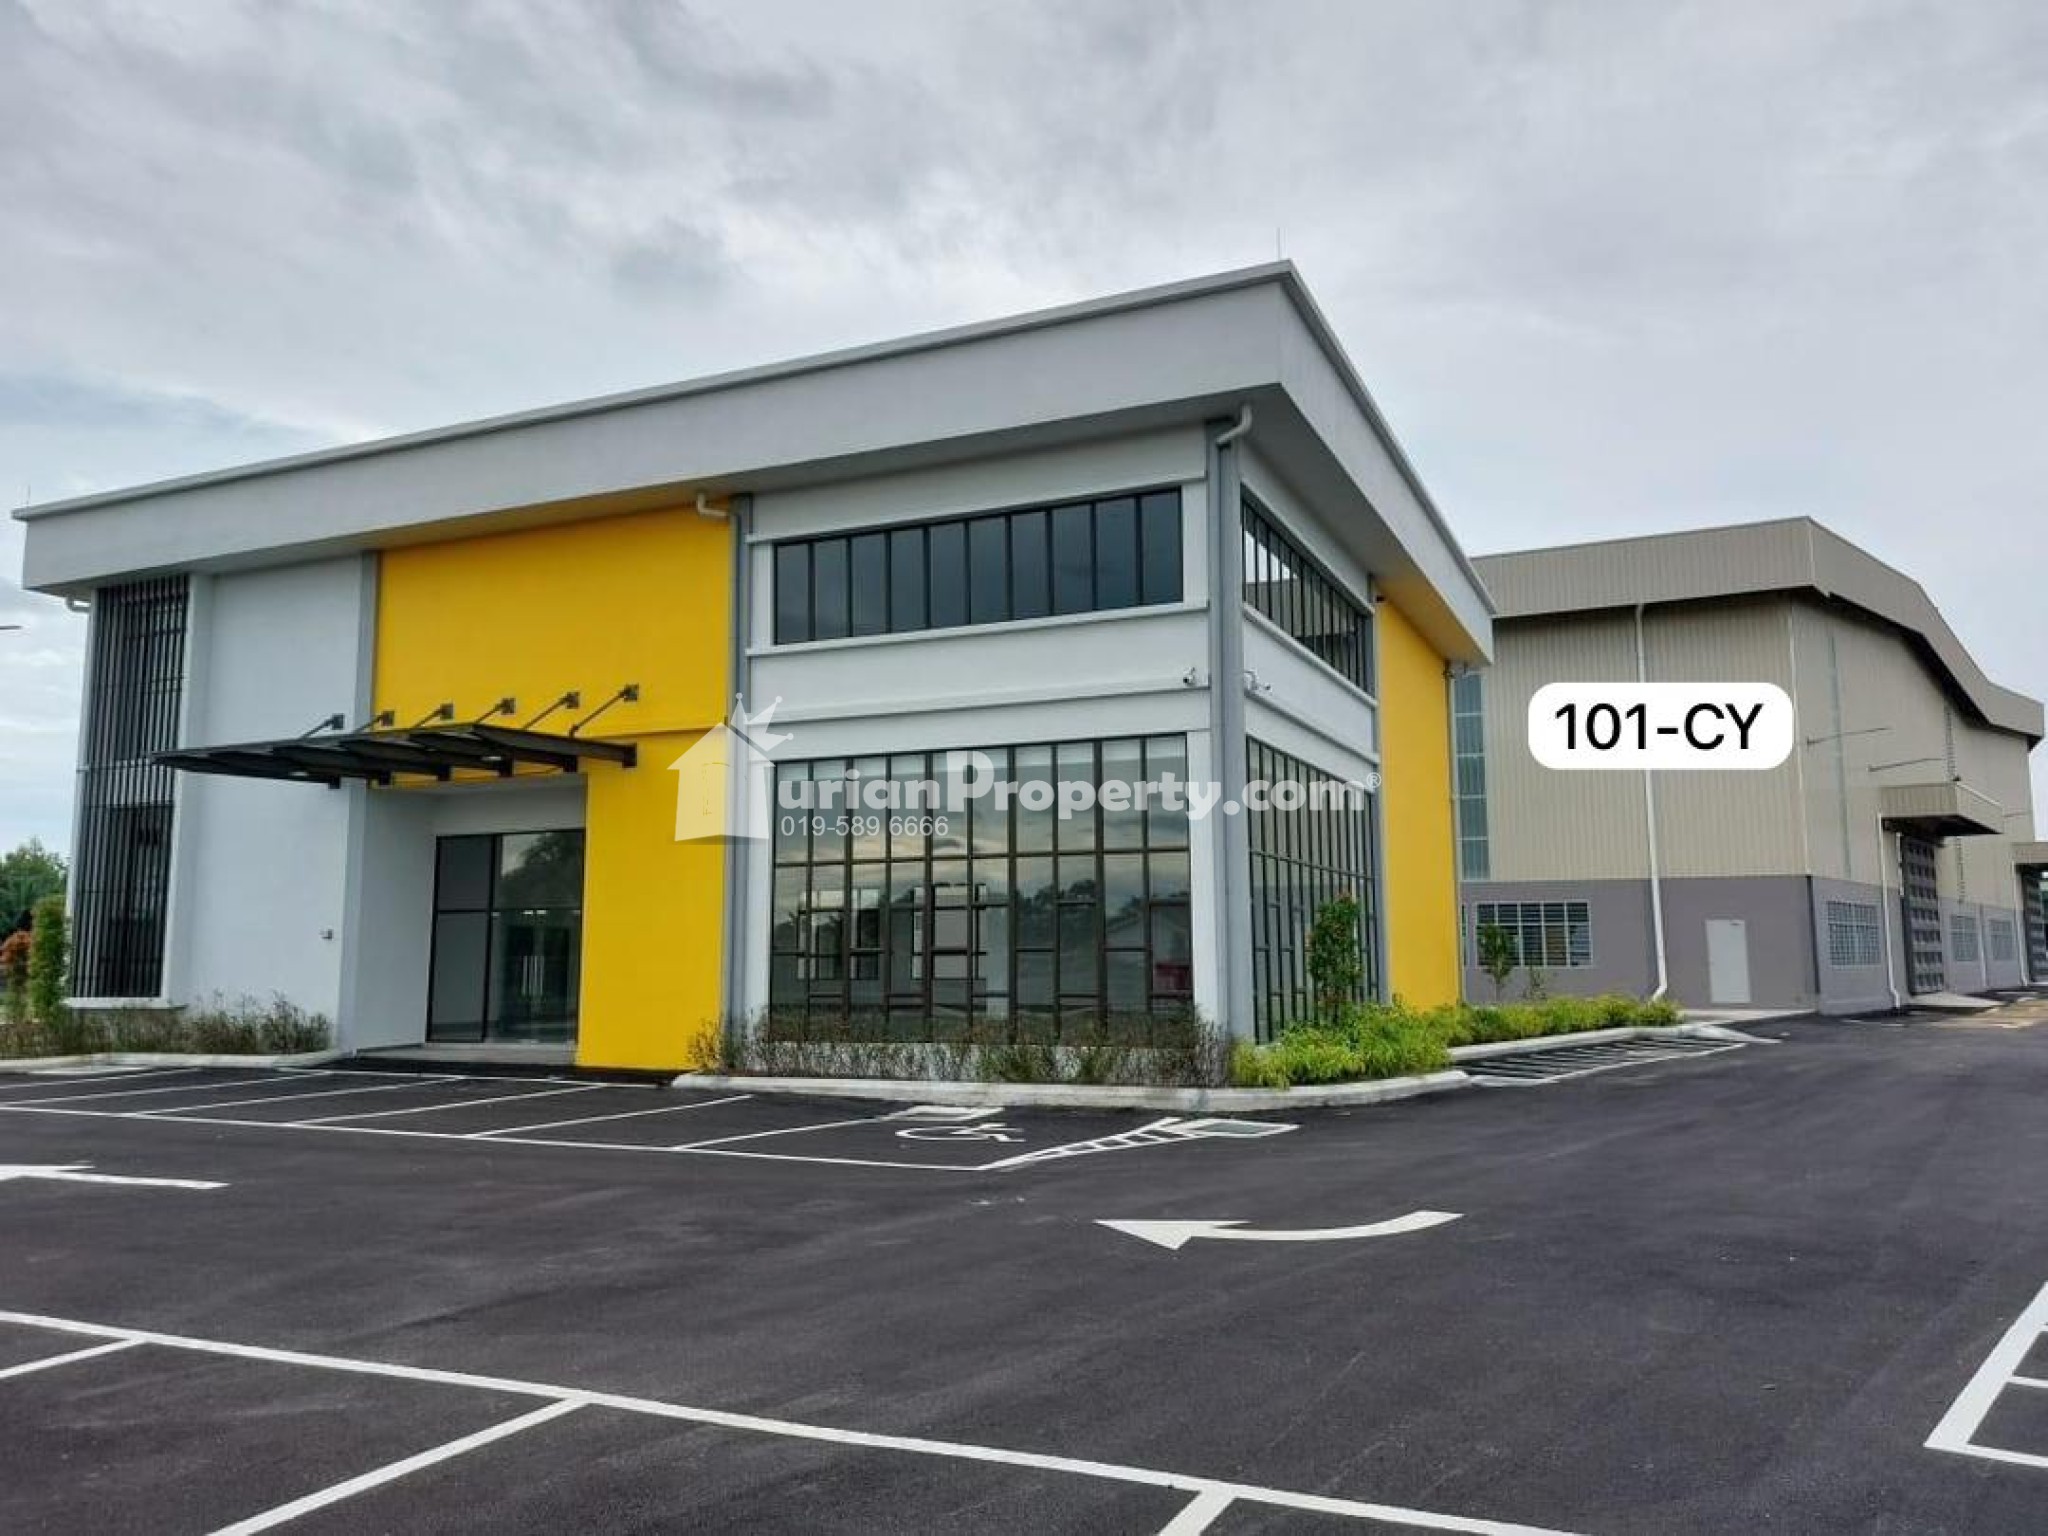 Detached Factory For Rent at Telok Gong Industrial